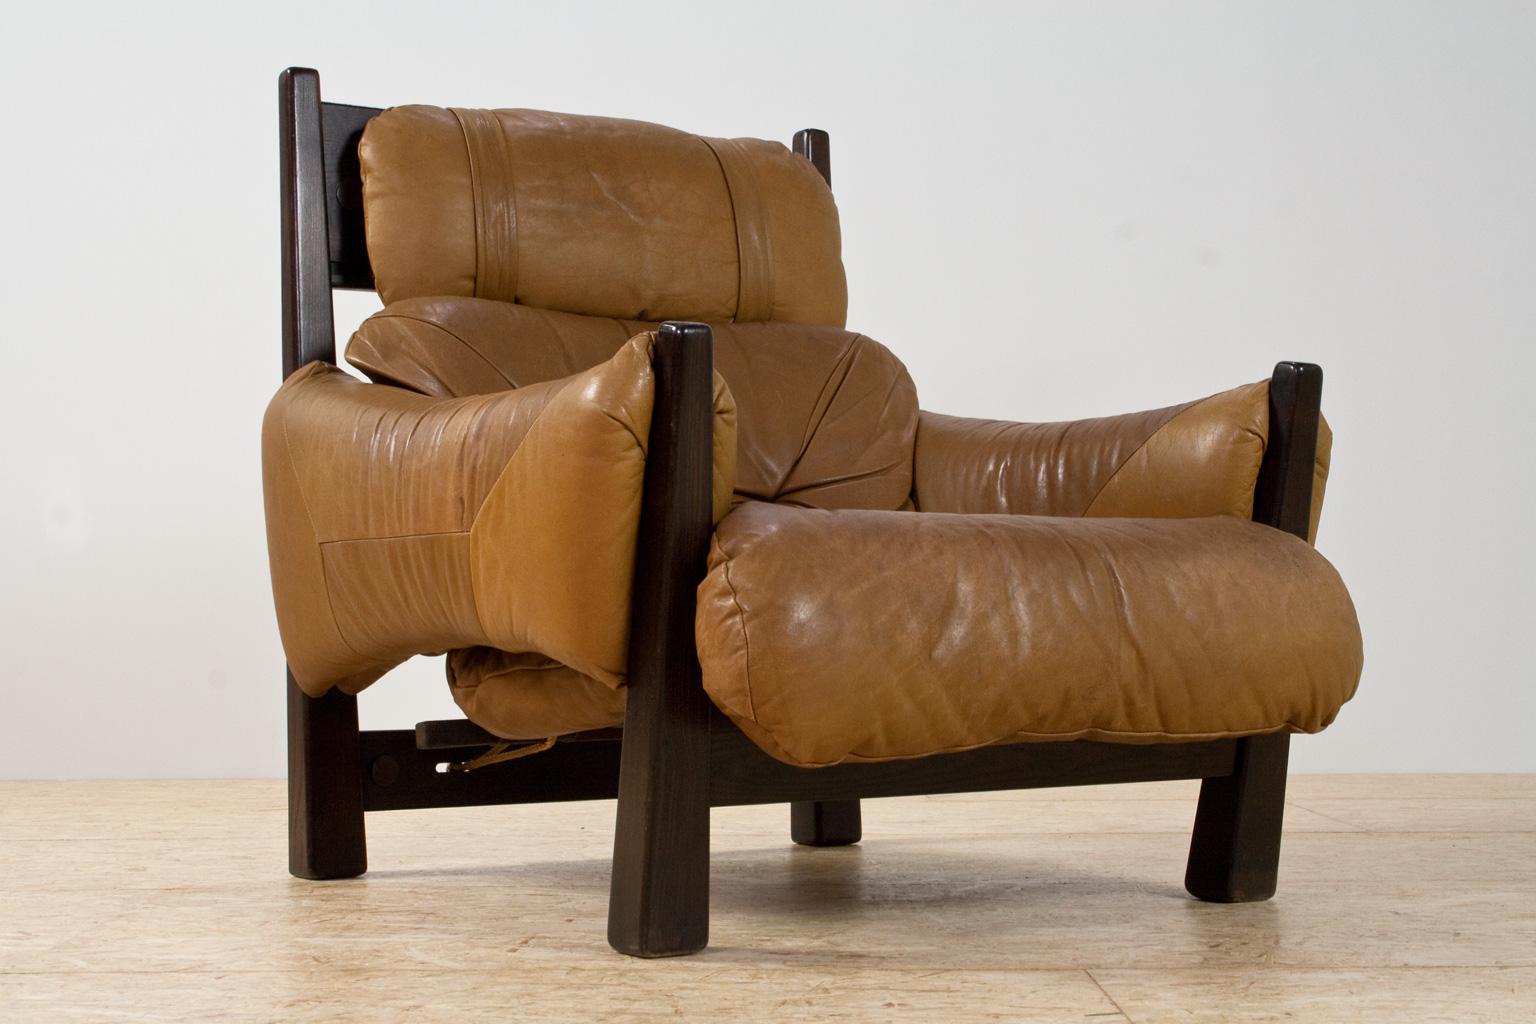 The dark asymmetrical ash wooden legs, the upholstered camel colored leather seating and armrests and the rope construction of the back seating, all refer to the iconic Brazilian modern and almost Brutalist designs of Percival Lafer. At present we